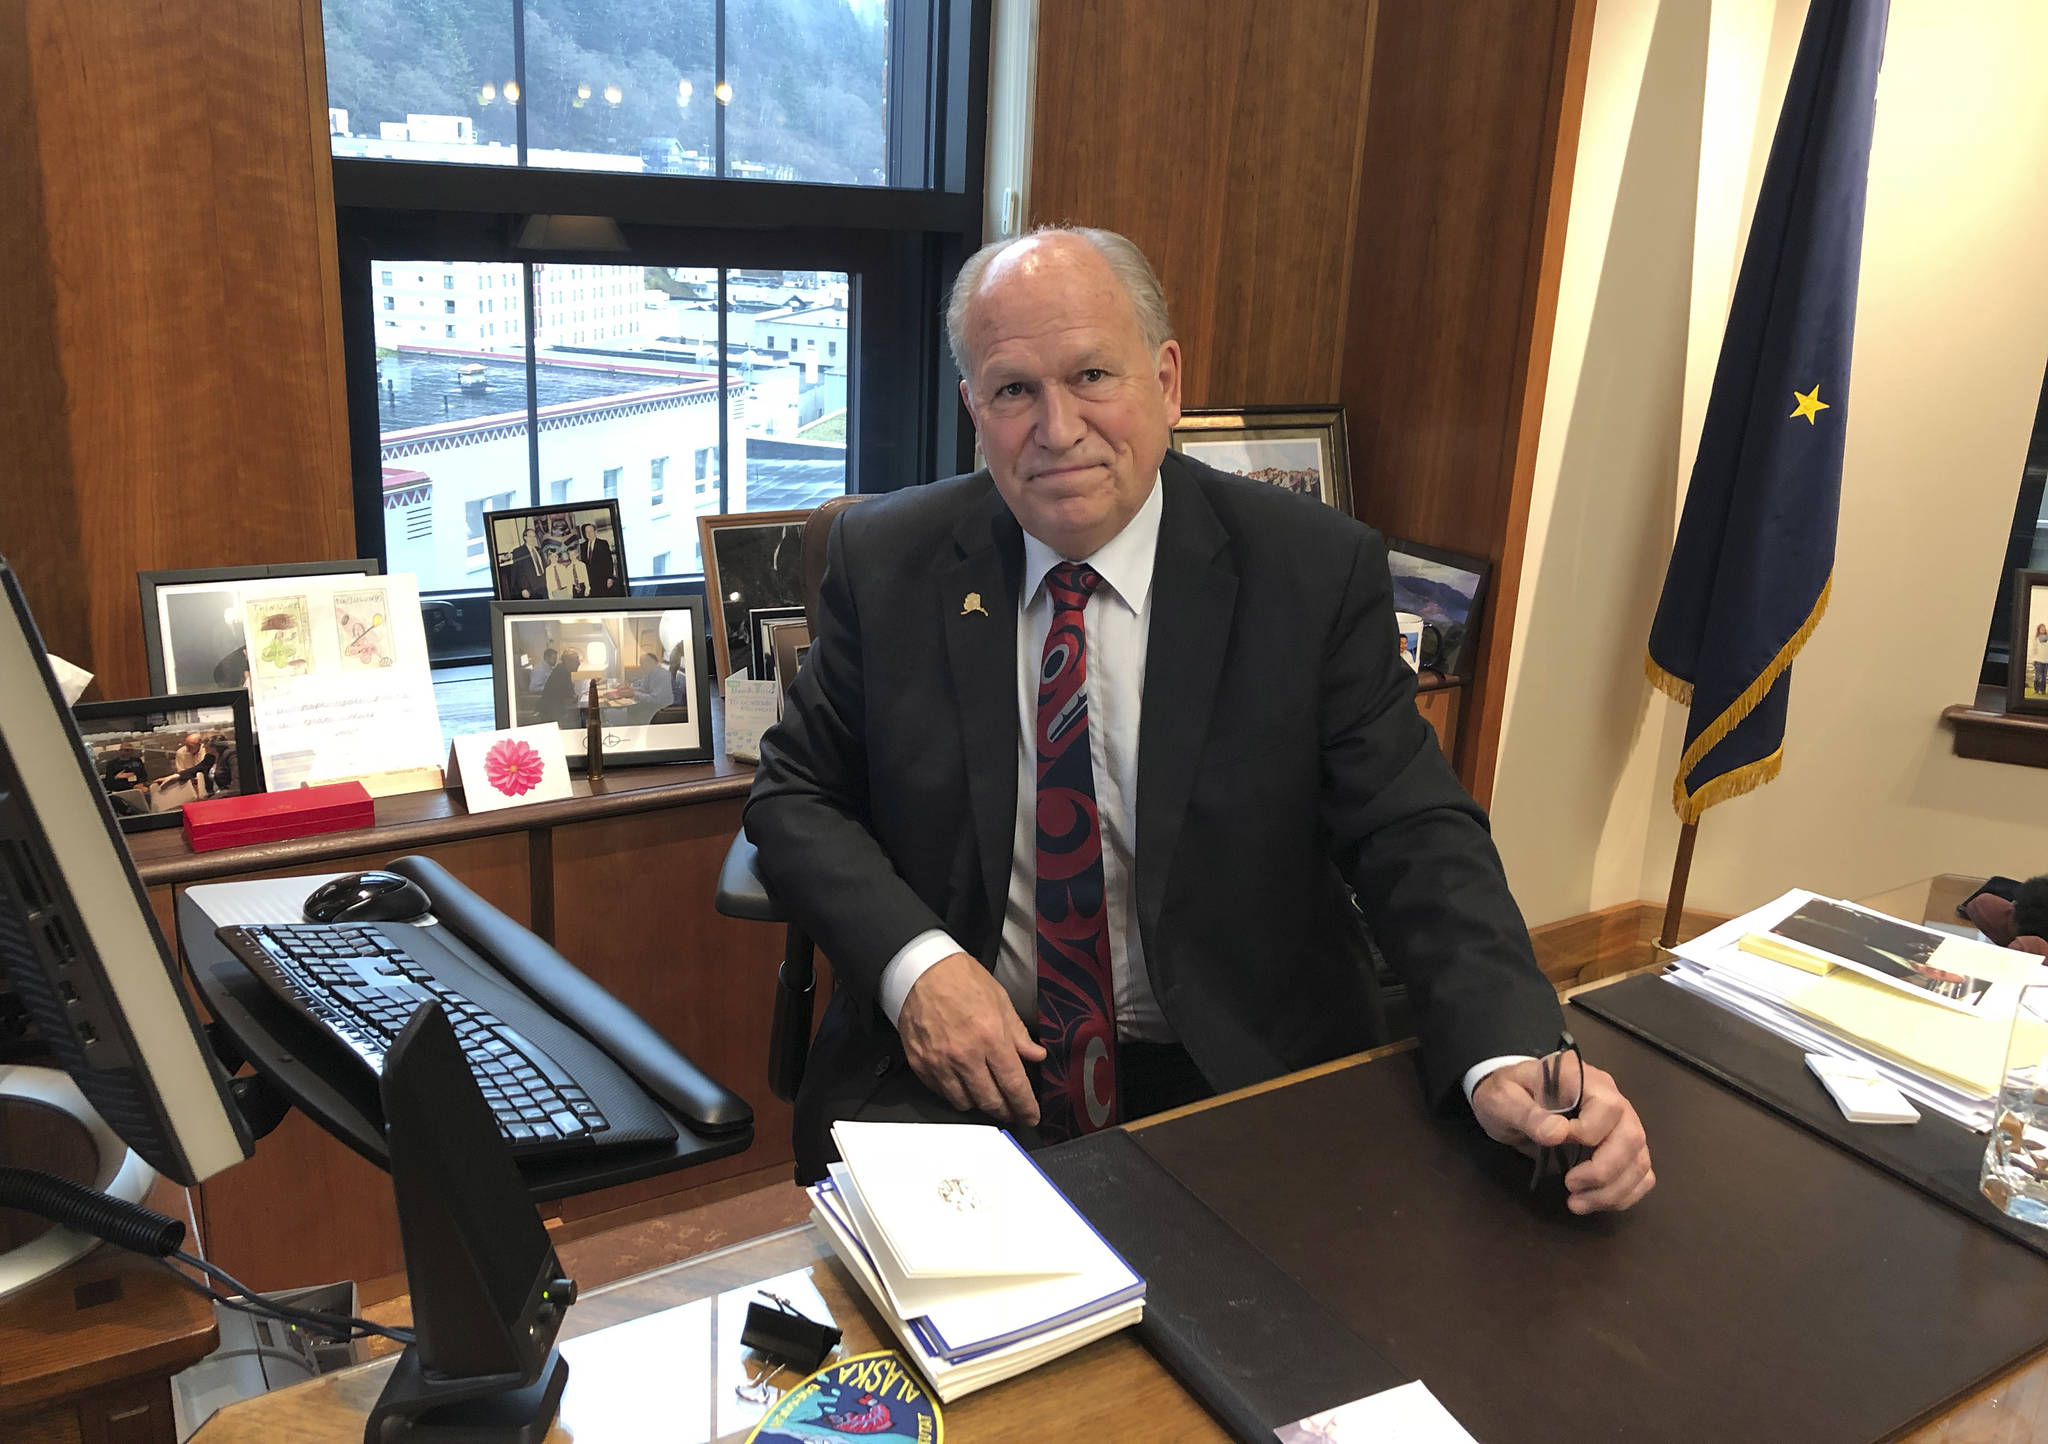 Associated Press
Former Alaska Gov. Bill Walker wants his old job back.
In this Nov. 13, 2018 file photo, Alaska Gov. Bill Walker poses in his office at the state Capitol in Juneau, Alaska. Walker announced plans Tuesday, Aug. 17, 2021, to run for governor again and said his former labor commissioner, Heidi Drygas, would be his running mate. (AP Photo/Becky Bohrer, File)